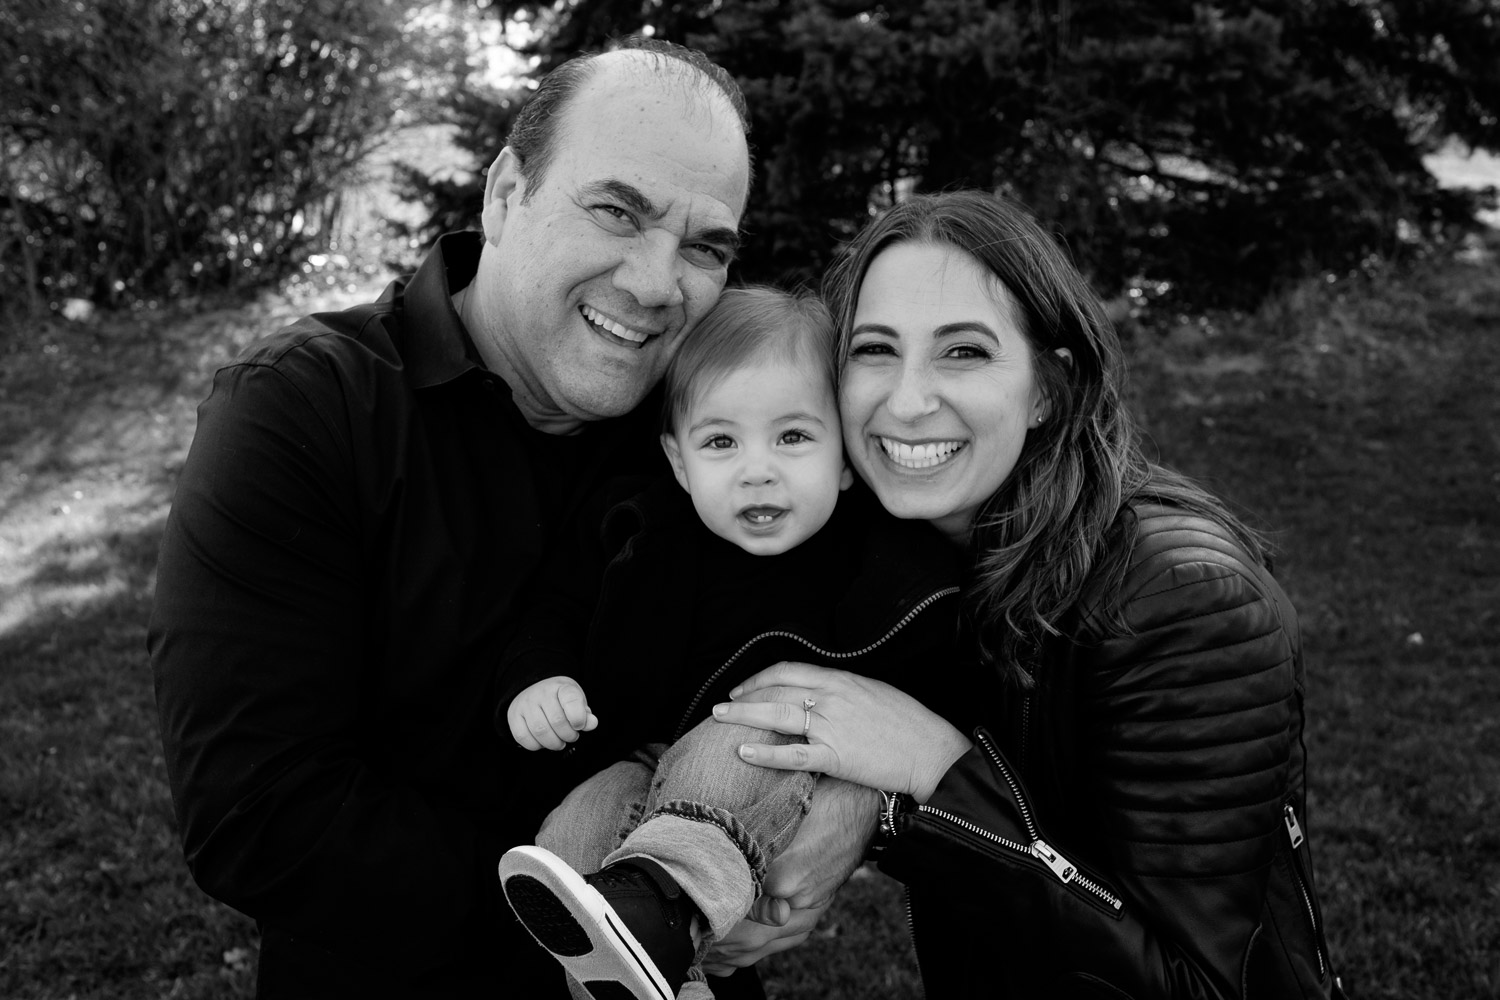  A collection of photographs from a family photography session in Toronto by Toronto wedding photographer Scott Williams. 